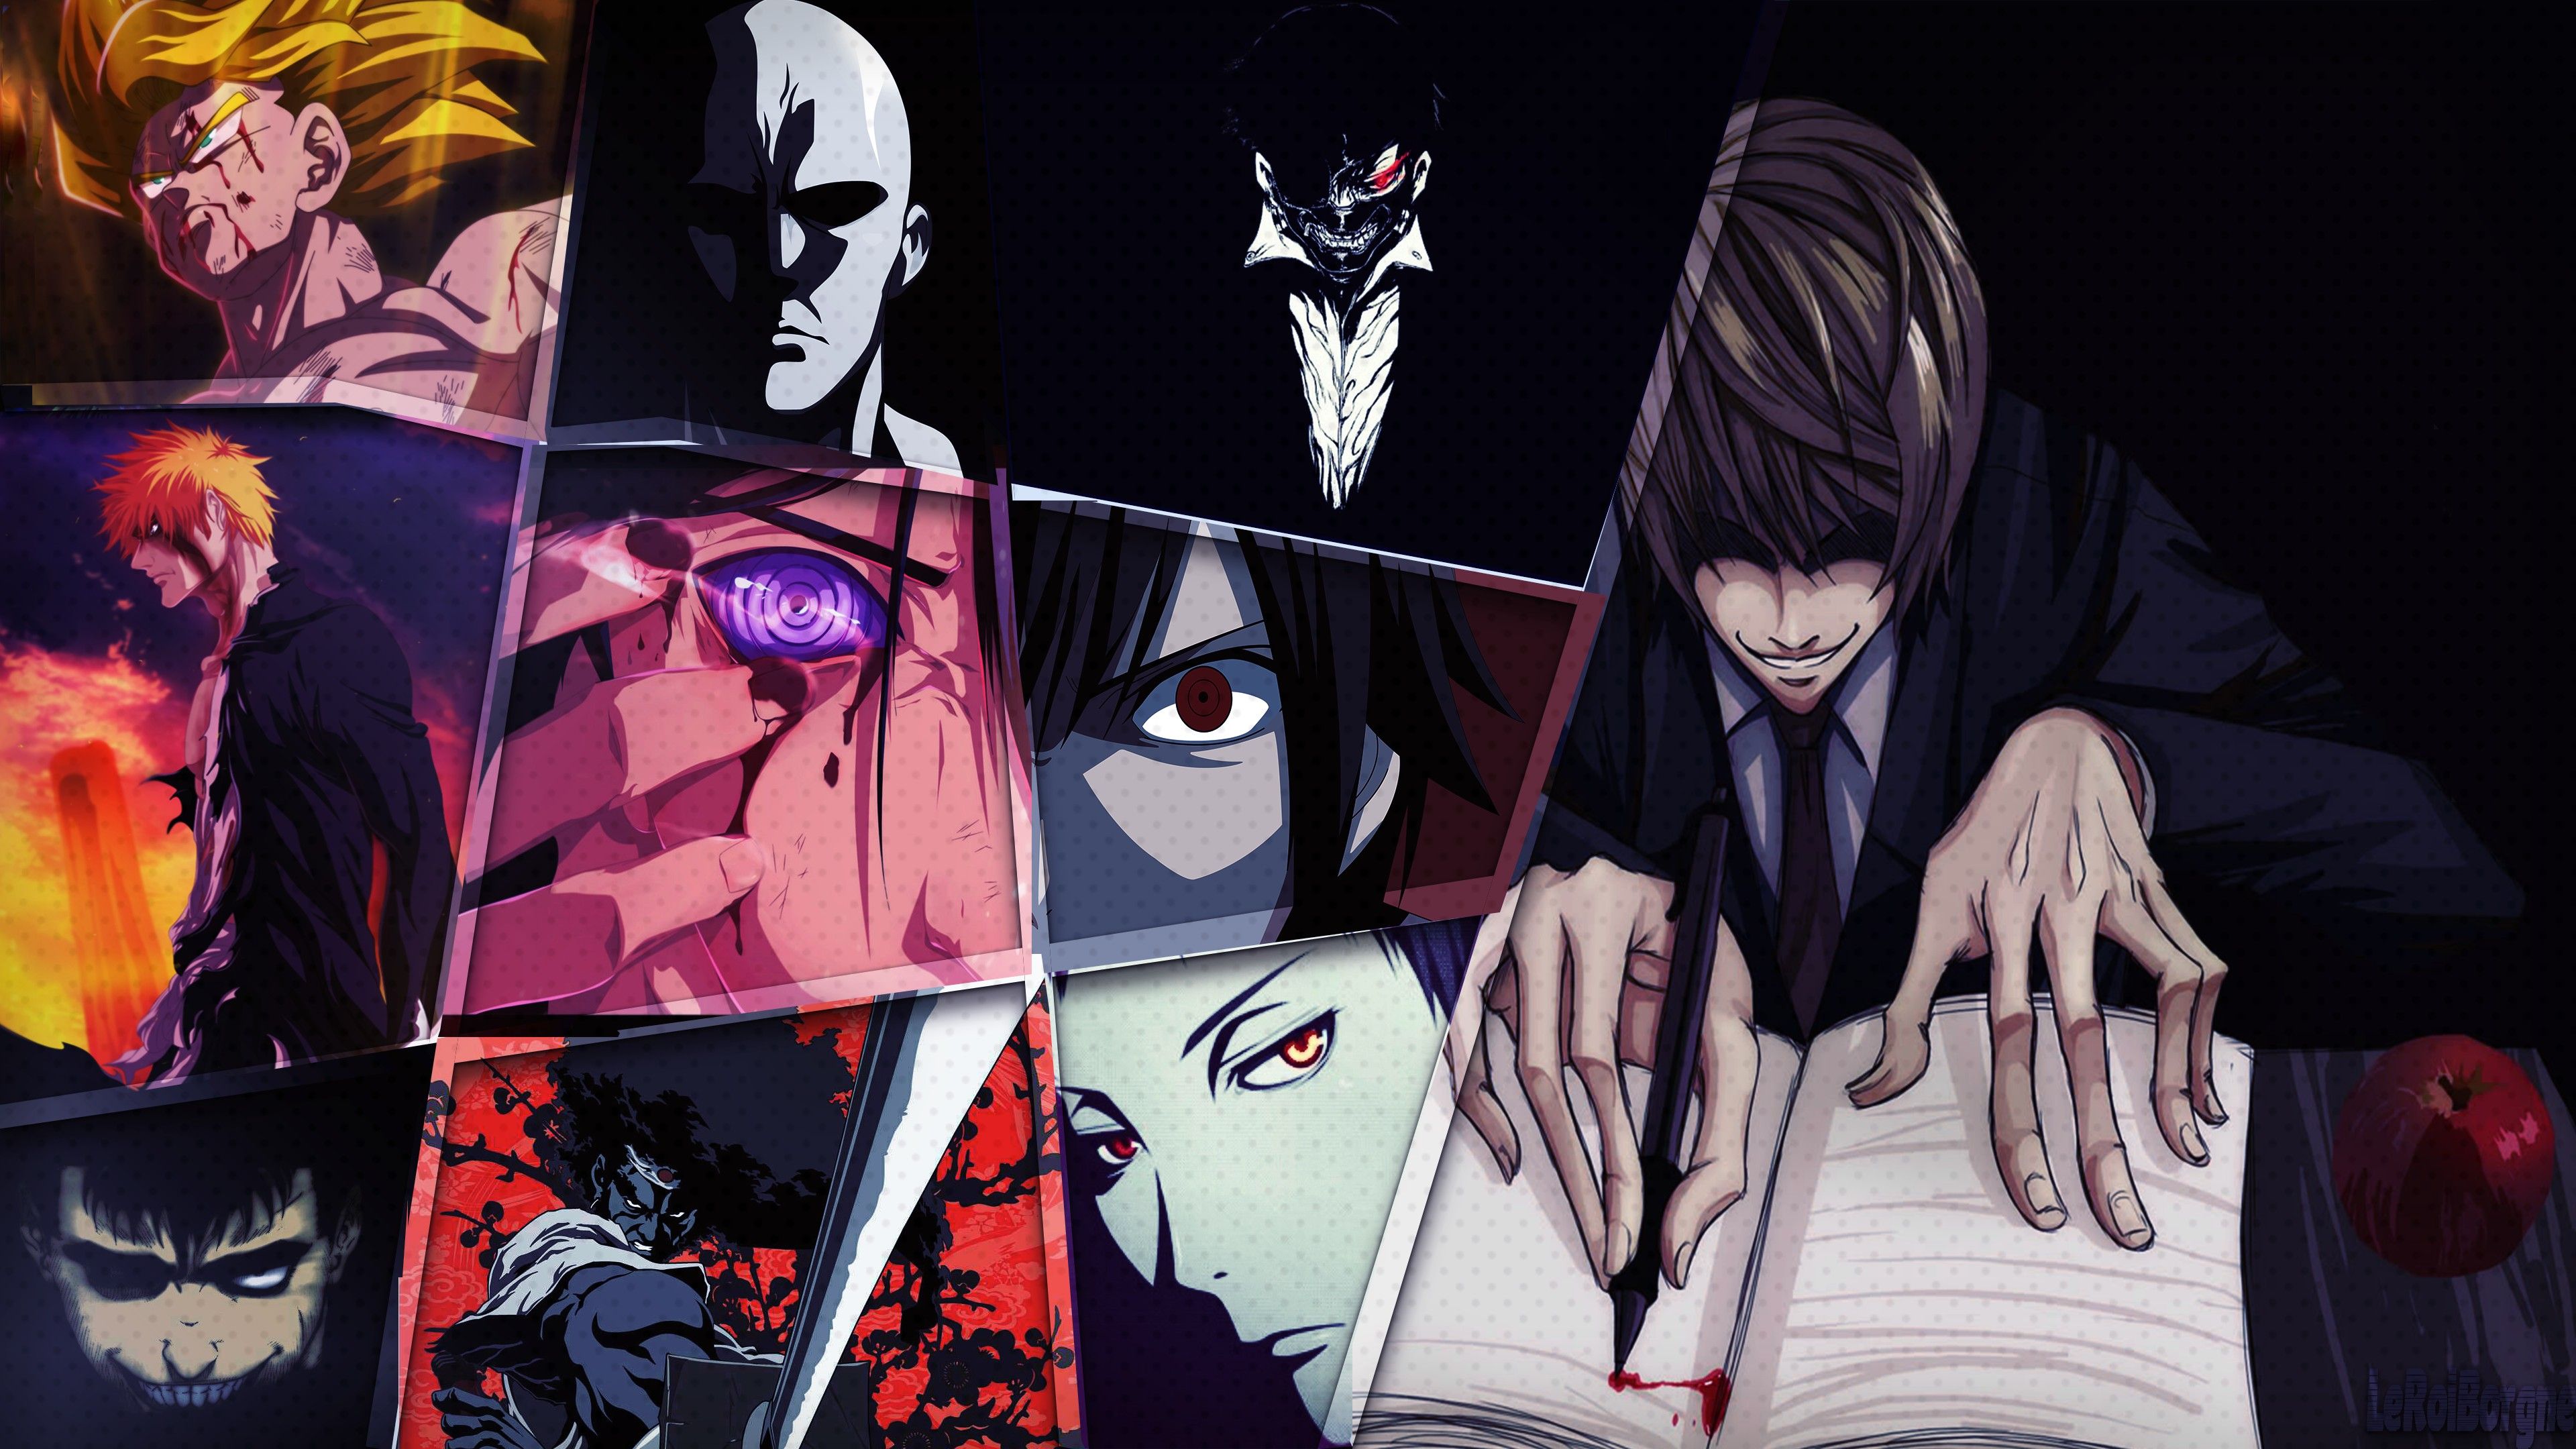 Death note anime wallpaper background images for desktop laptop and mobile devices - Dark anime, black anime